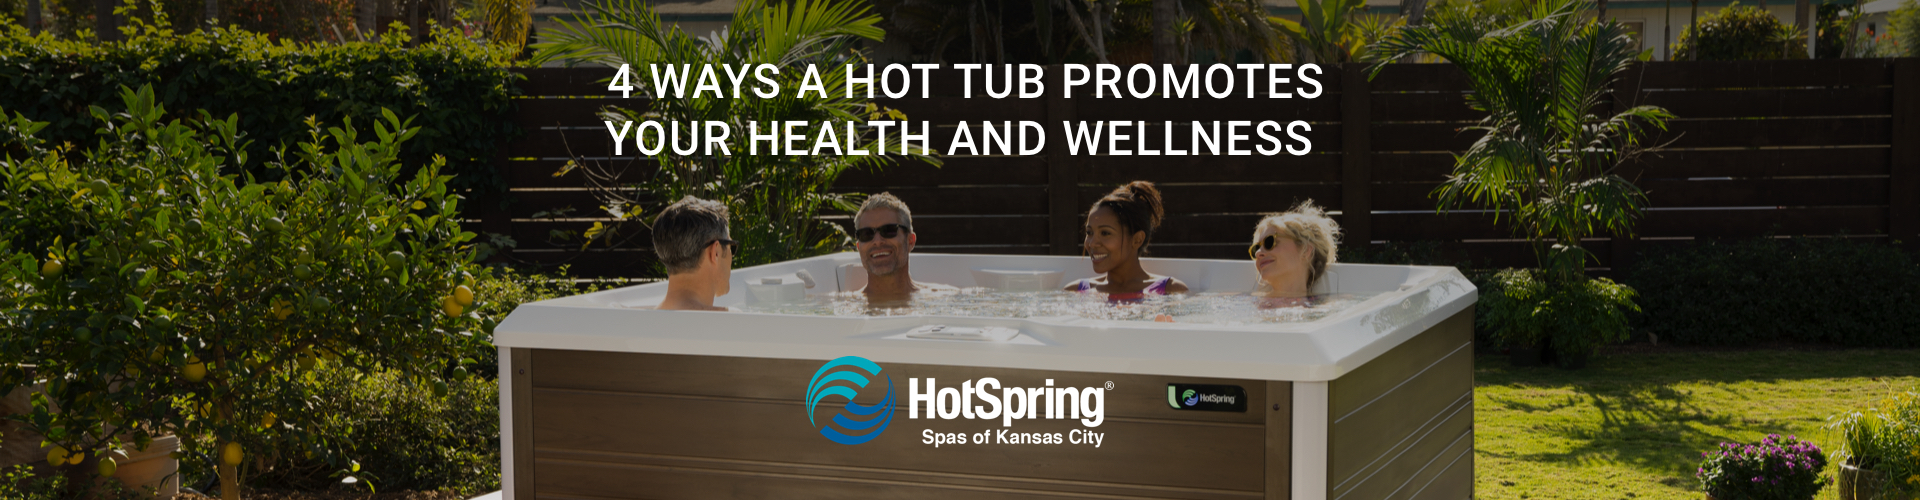 4 Ways a Hot Tub Promotes Your Health and Wellness